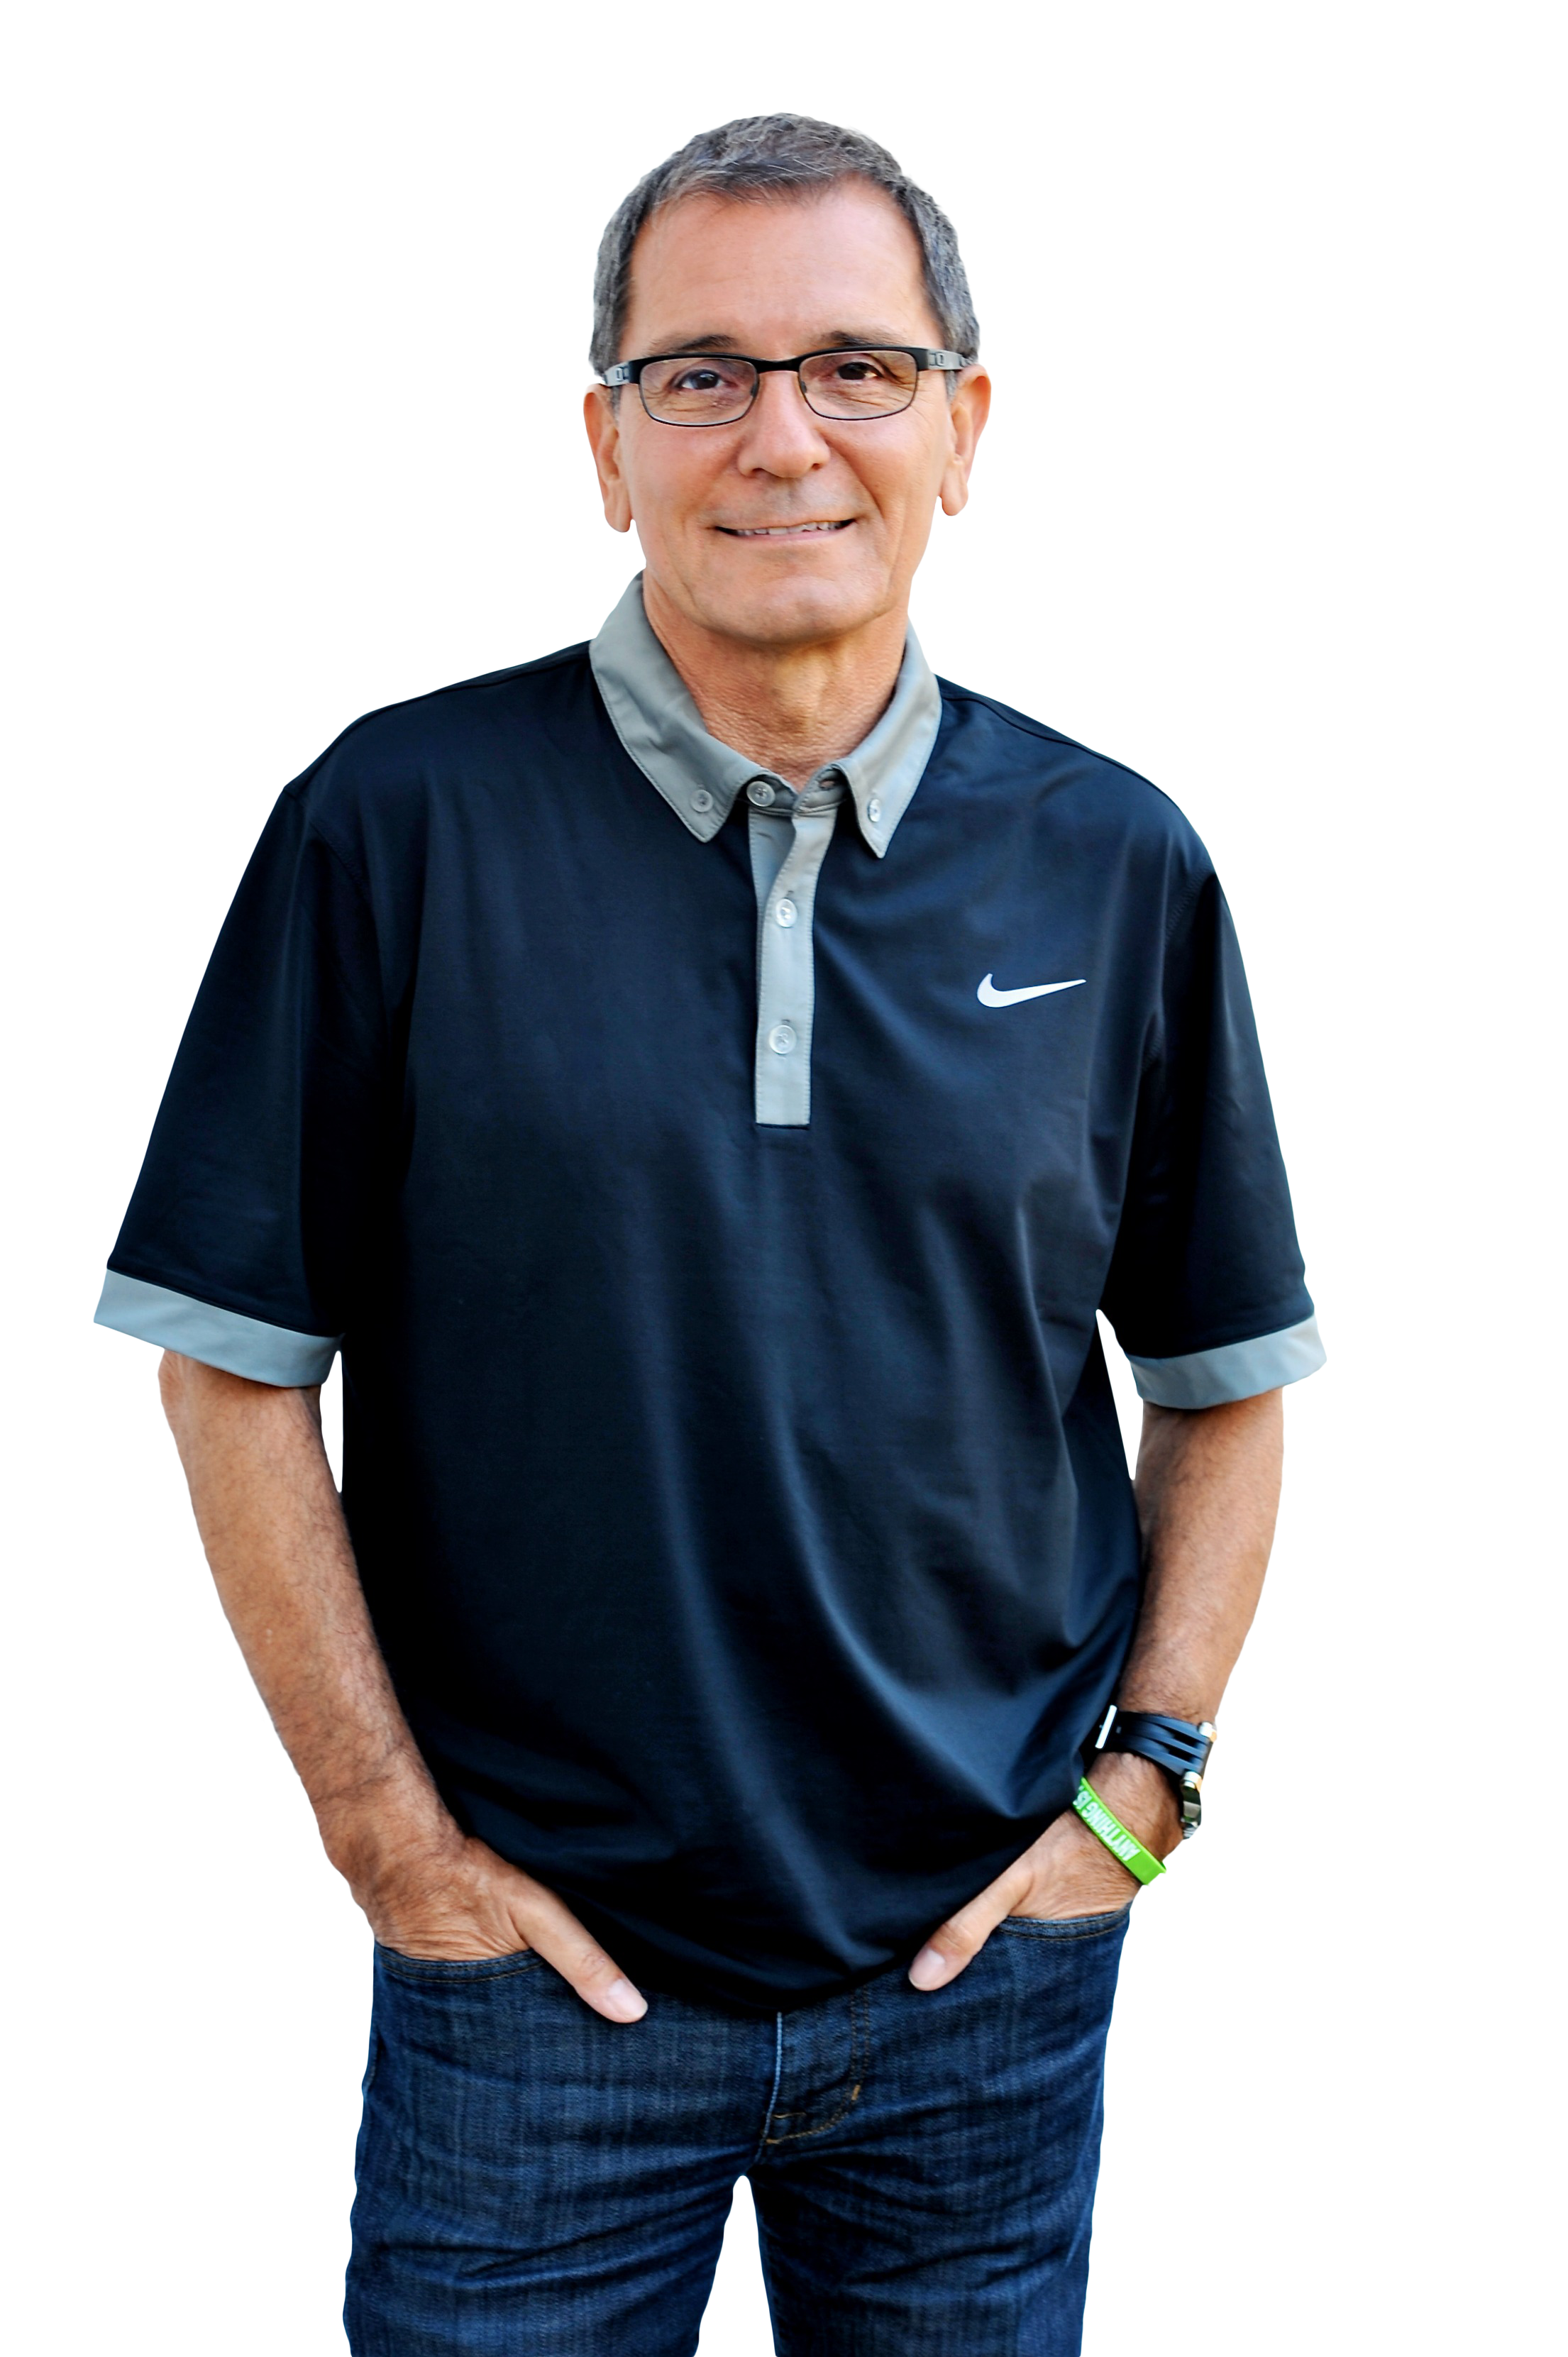 Sports Mental Performance Expert Jim Madrid Announces Complimentary "Mental Toughness" Sessions in Dallas - Ft. Worth Metro Area